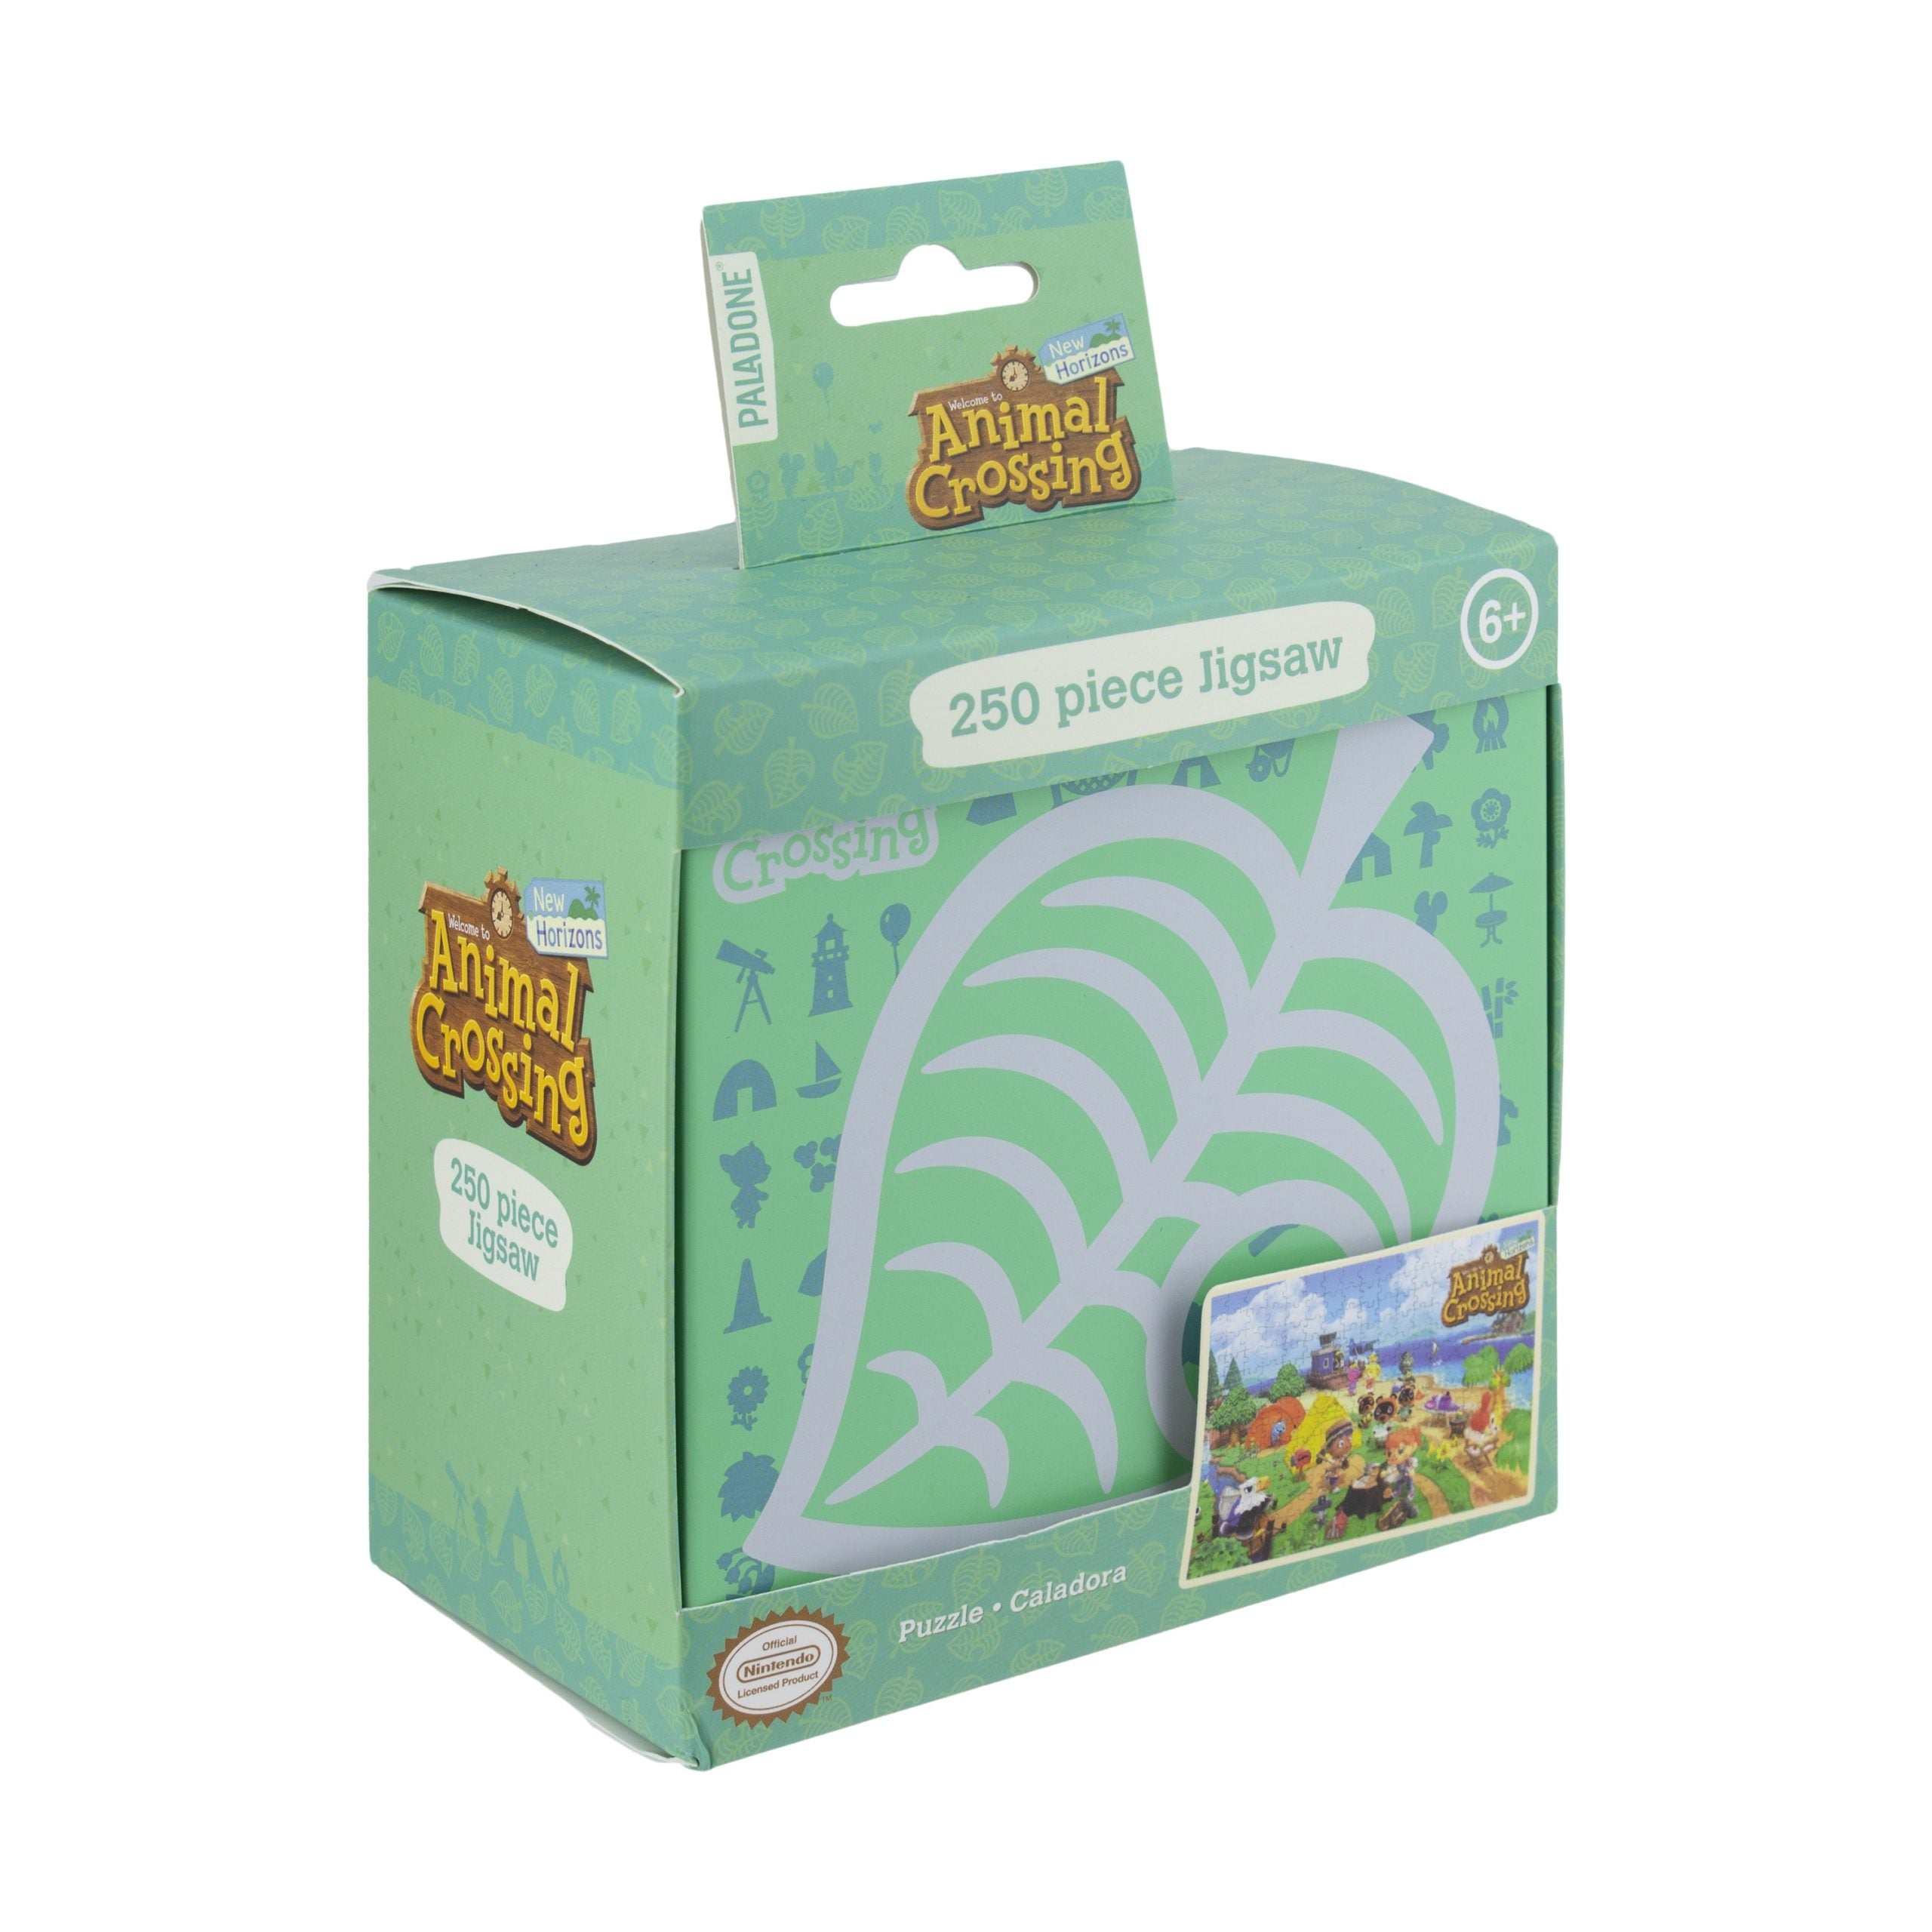 Puzzle - Animal Crossing 250pc (In Tin)